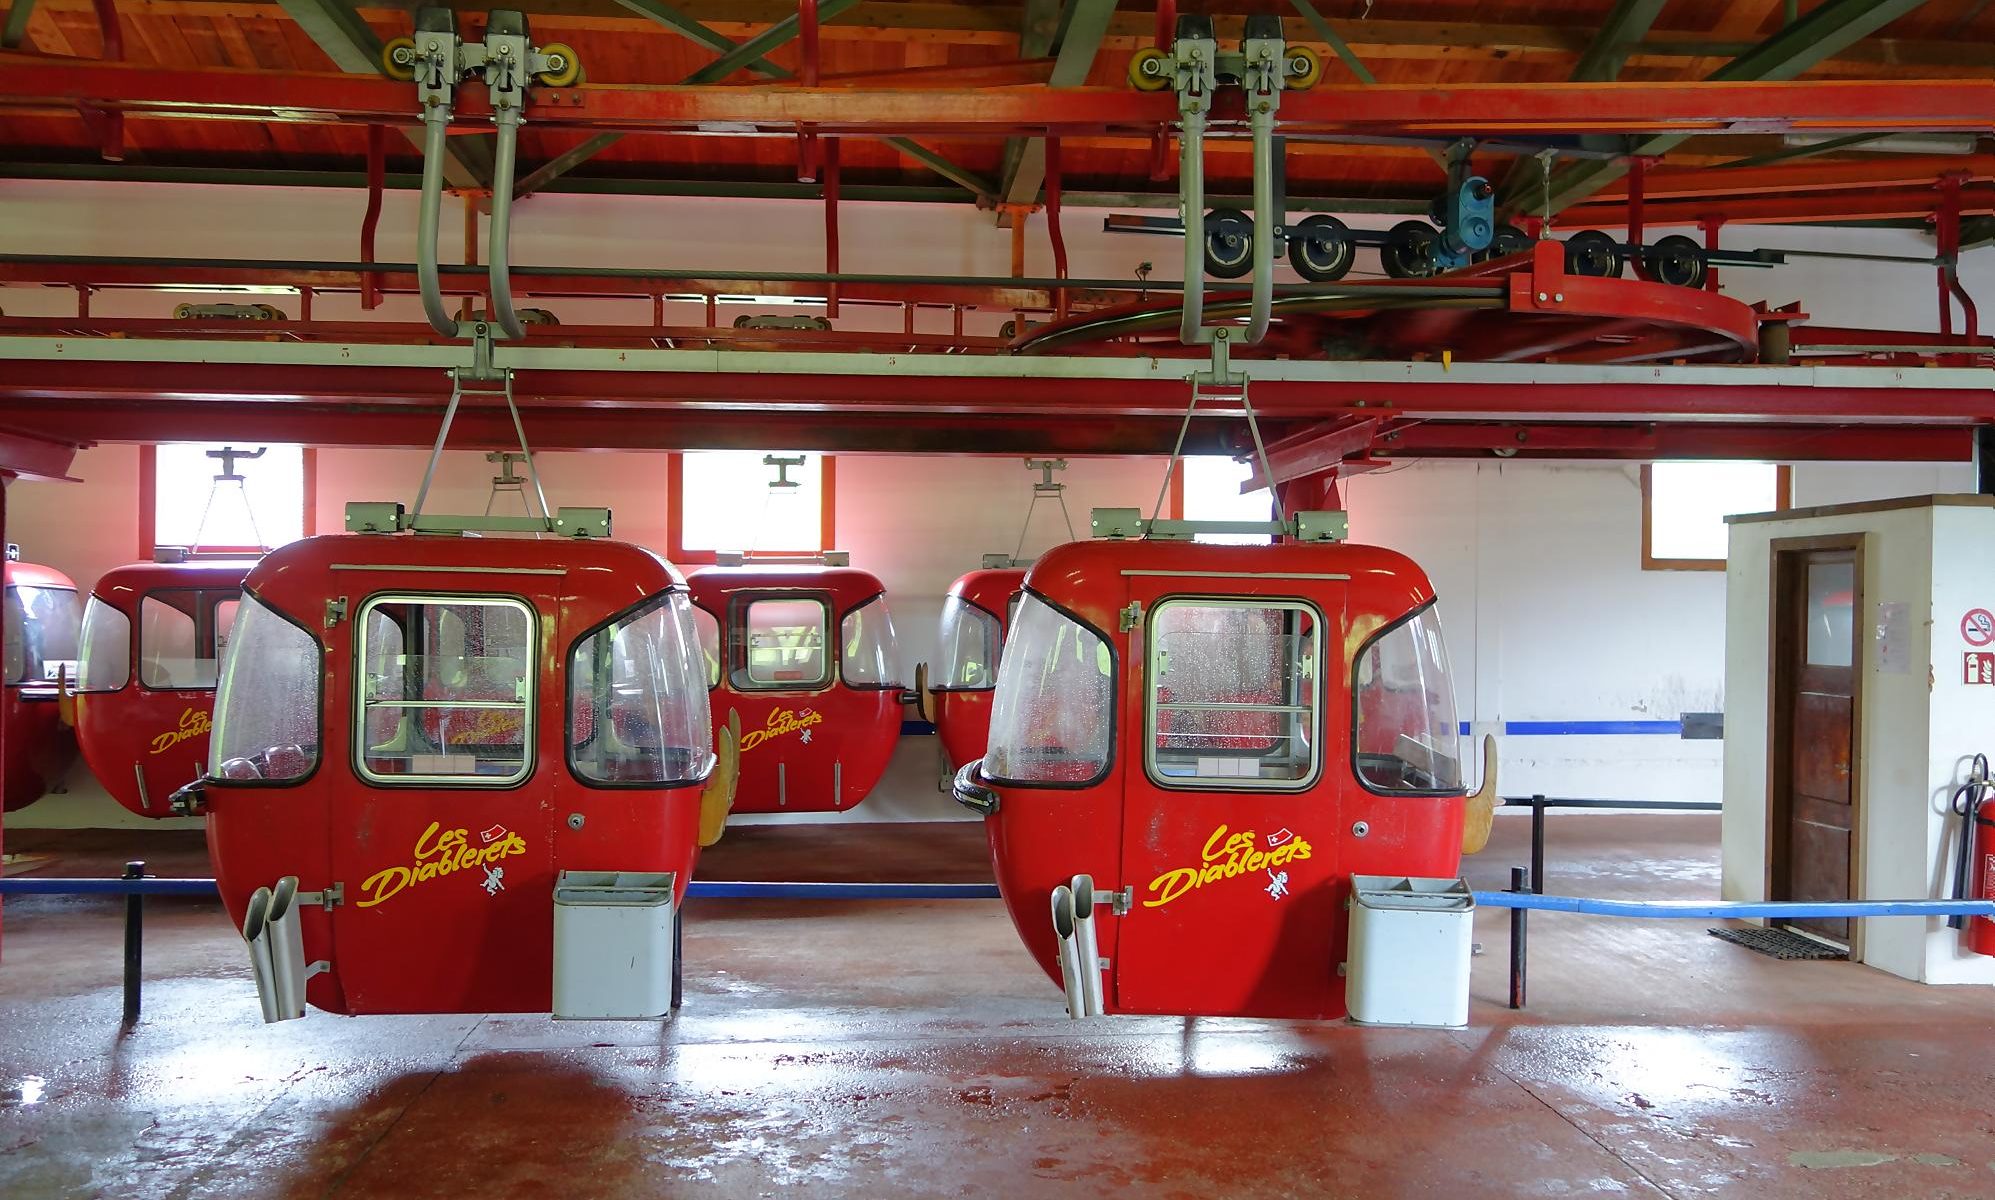 The Isenau lift is due to be replaced. Photo: Les Diablerets.